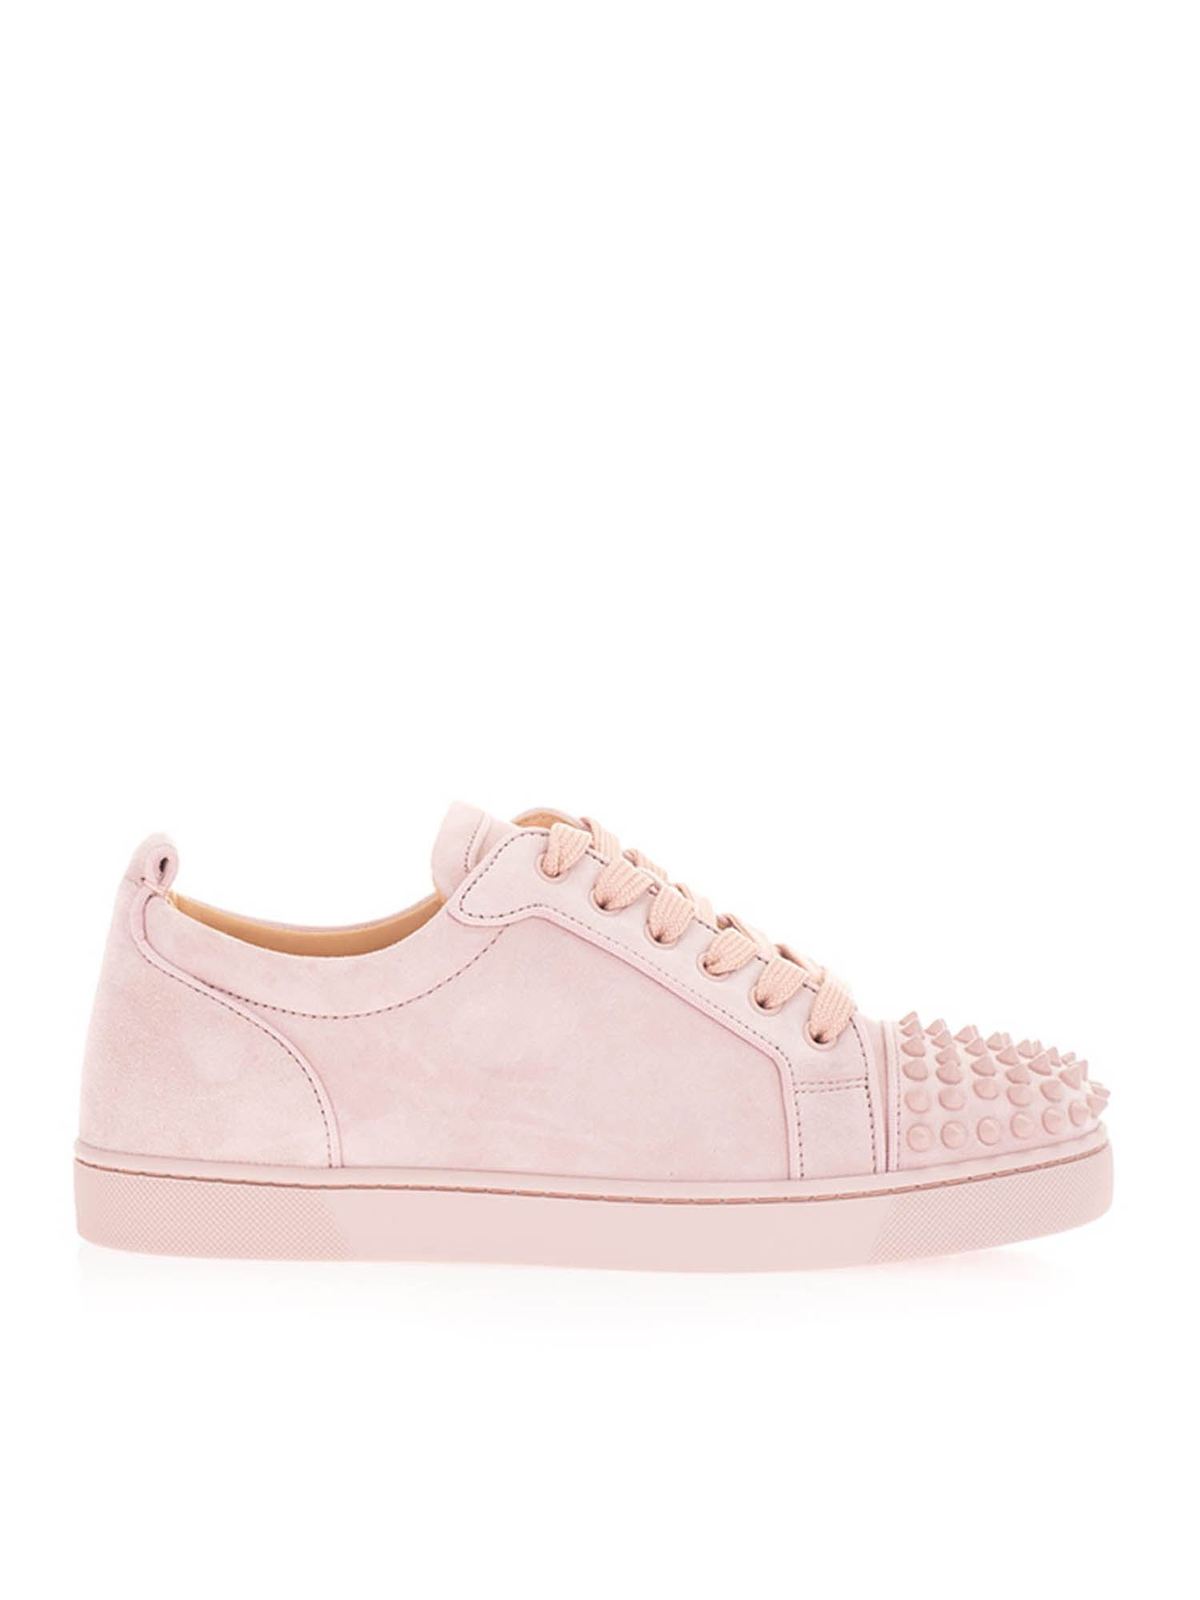 Christian Louis Junior Spikes Sneakers In Pink | ModeSens